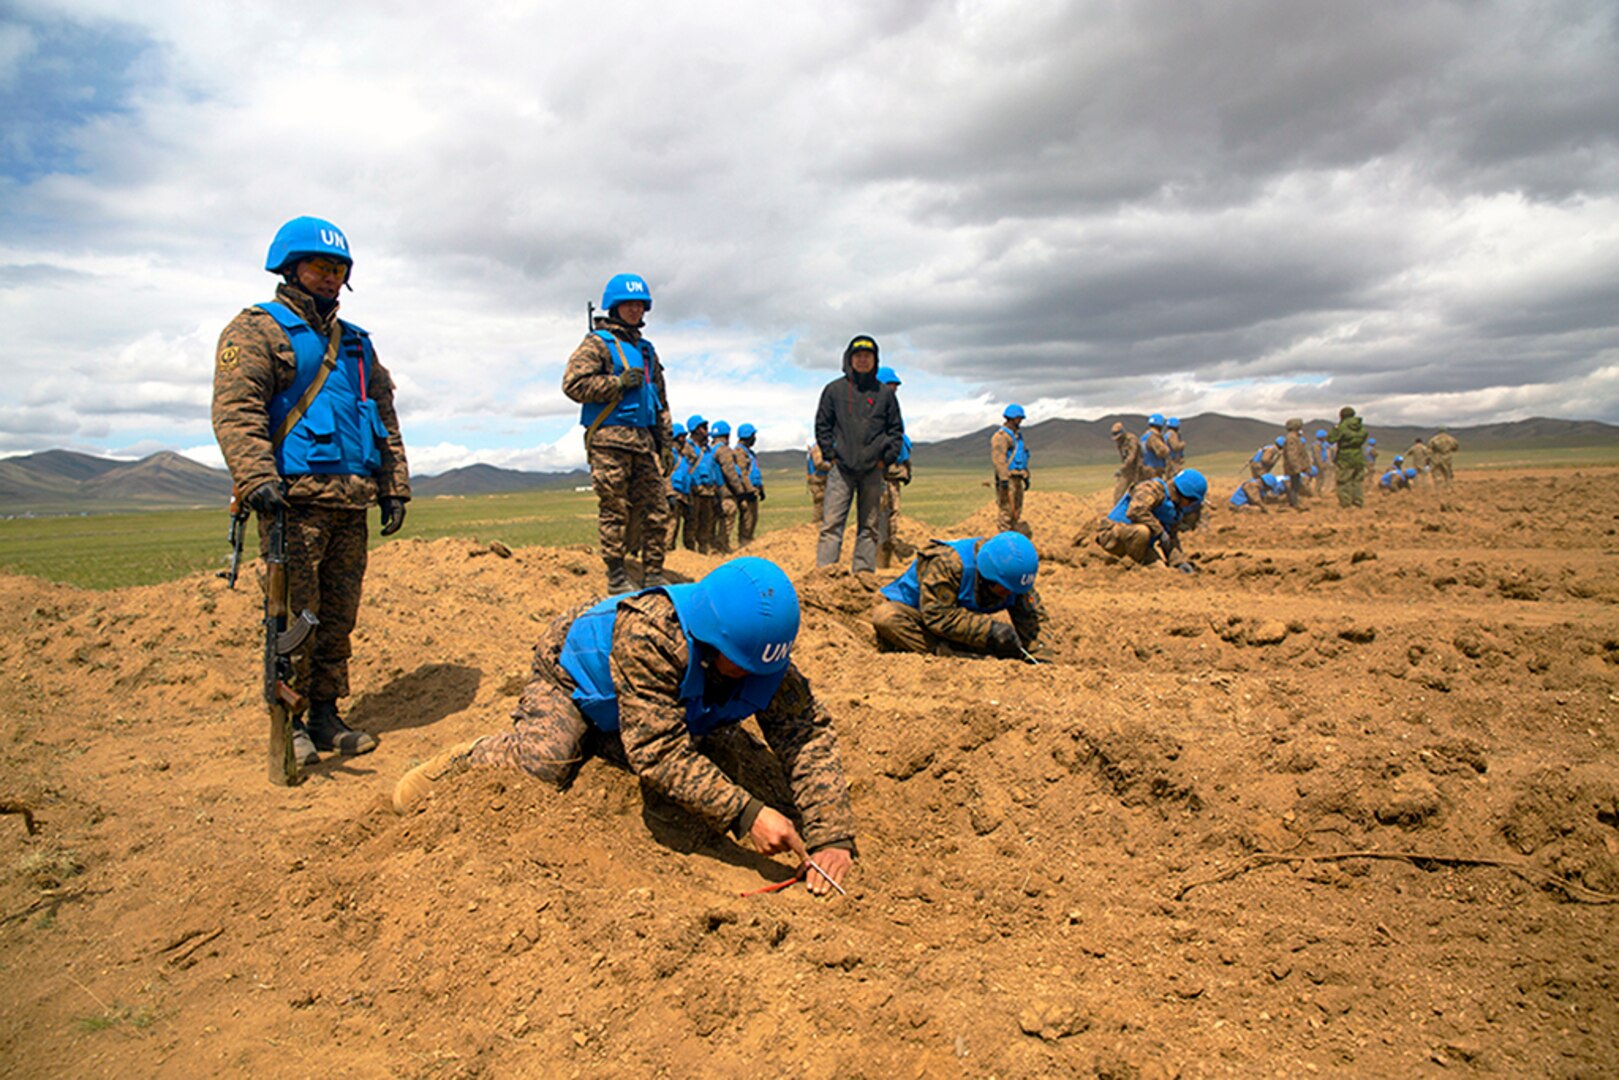 Members of the Mongolian Armed Forces participate in minefield self-extraction training during Khaan Quest 2016 at Five Hills Training Area near Ulaanbaatar, Mongolia. The training provided MAF members with the skills to safely identify and mark potential threats in a minefield. Khaan Quest 2016 is an annual, multinational peacekeeping operations exercise hosted by the Mongolian Armed Forces, co-sponsored by U.S. Pacific Command, and supported by U.S. Army Pacific and U.S. Marine Corps Forces, Pacific. Khaan Quest, in its 14th iteration, is the capstone exercise for this year’s Global Peace Operations Initiative program. The exercise focuses on training activities to enhance international interoperability, develop peacekeeping capabilities, build to mil-to-mil relationships, and enhance military readiness. 